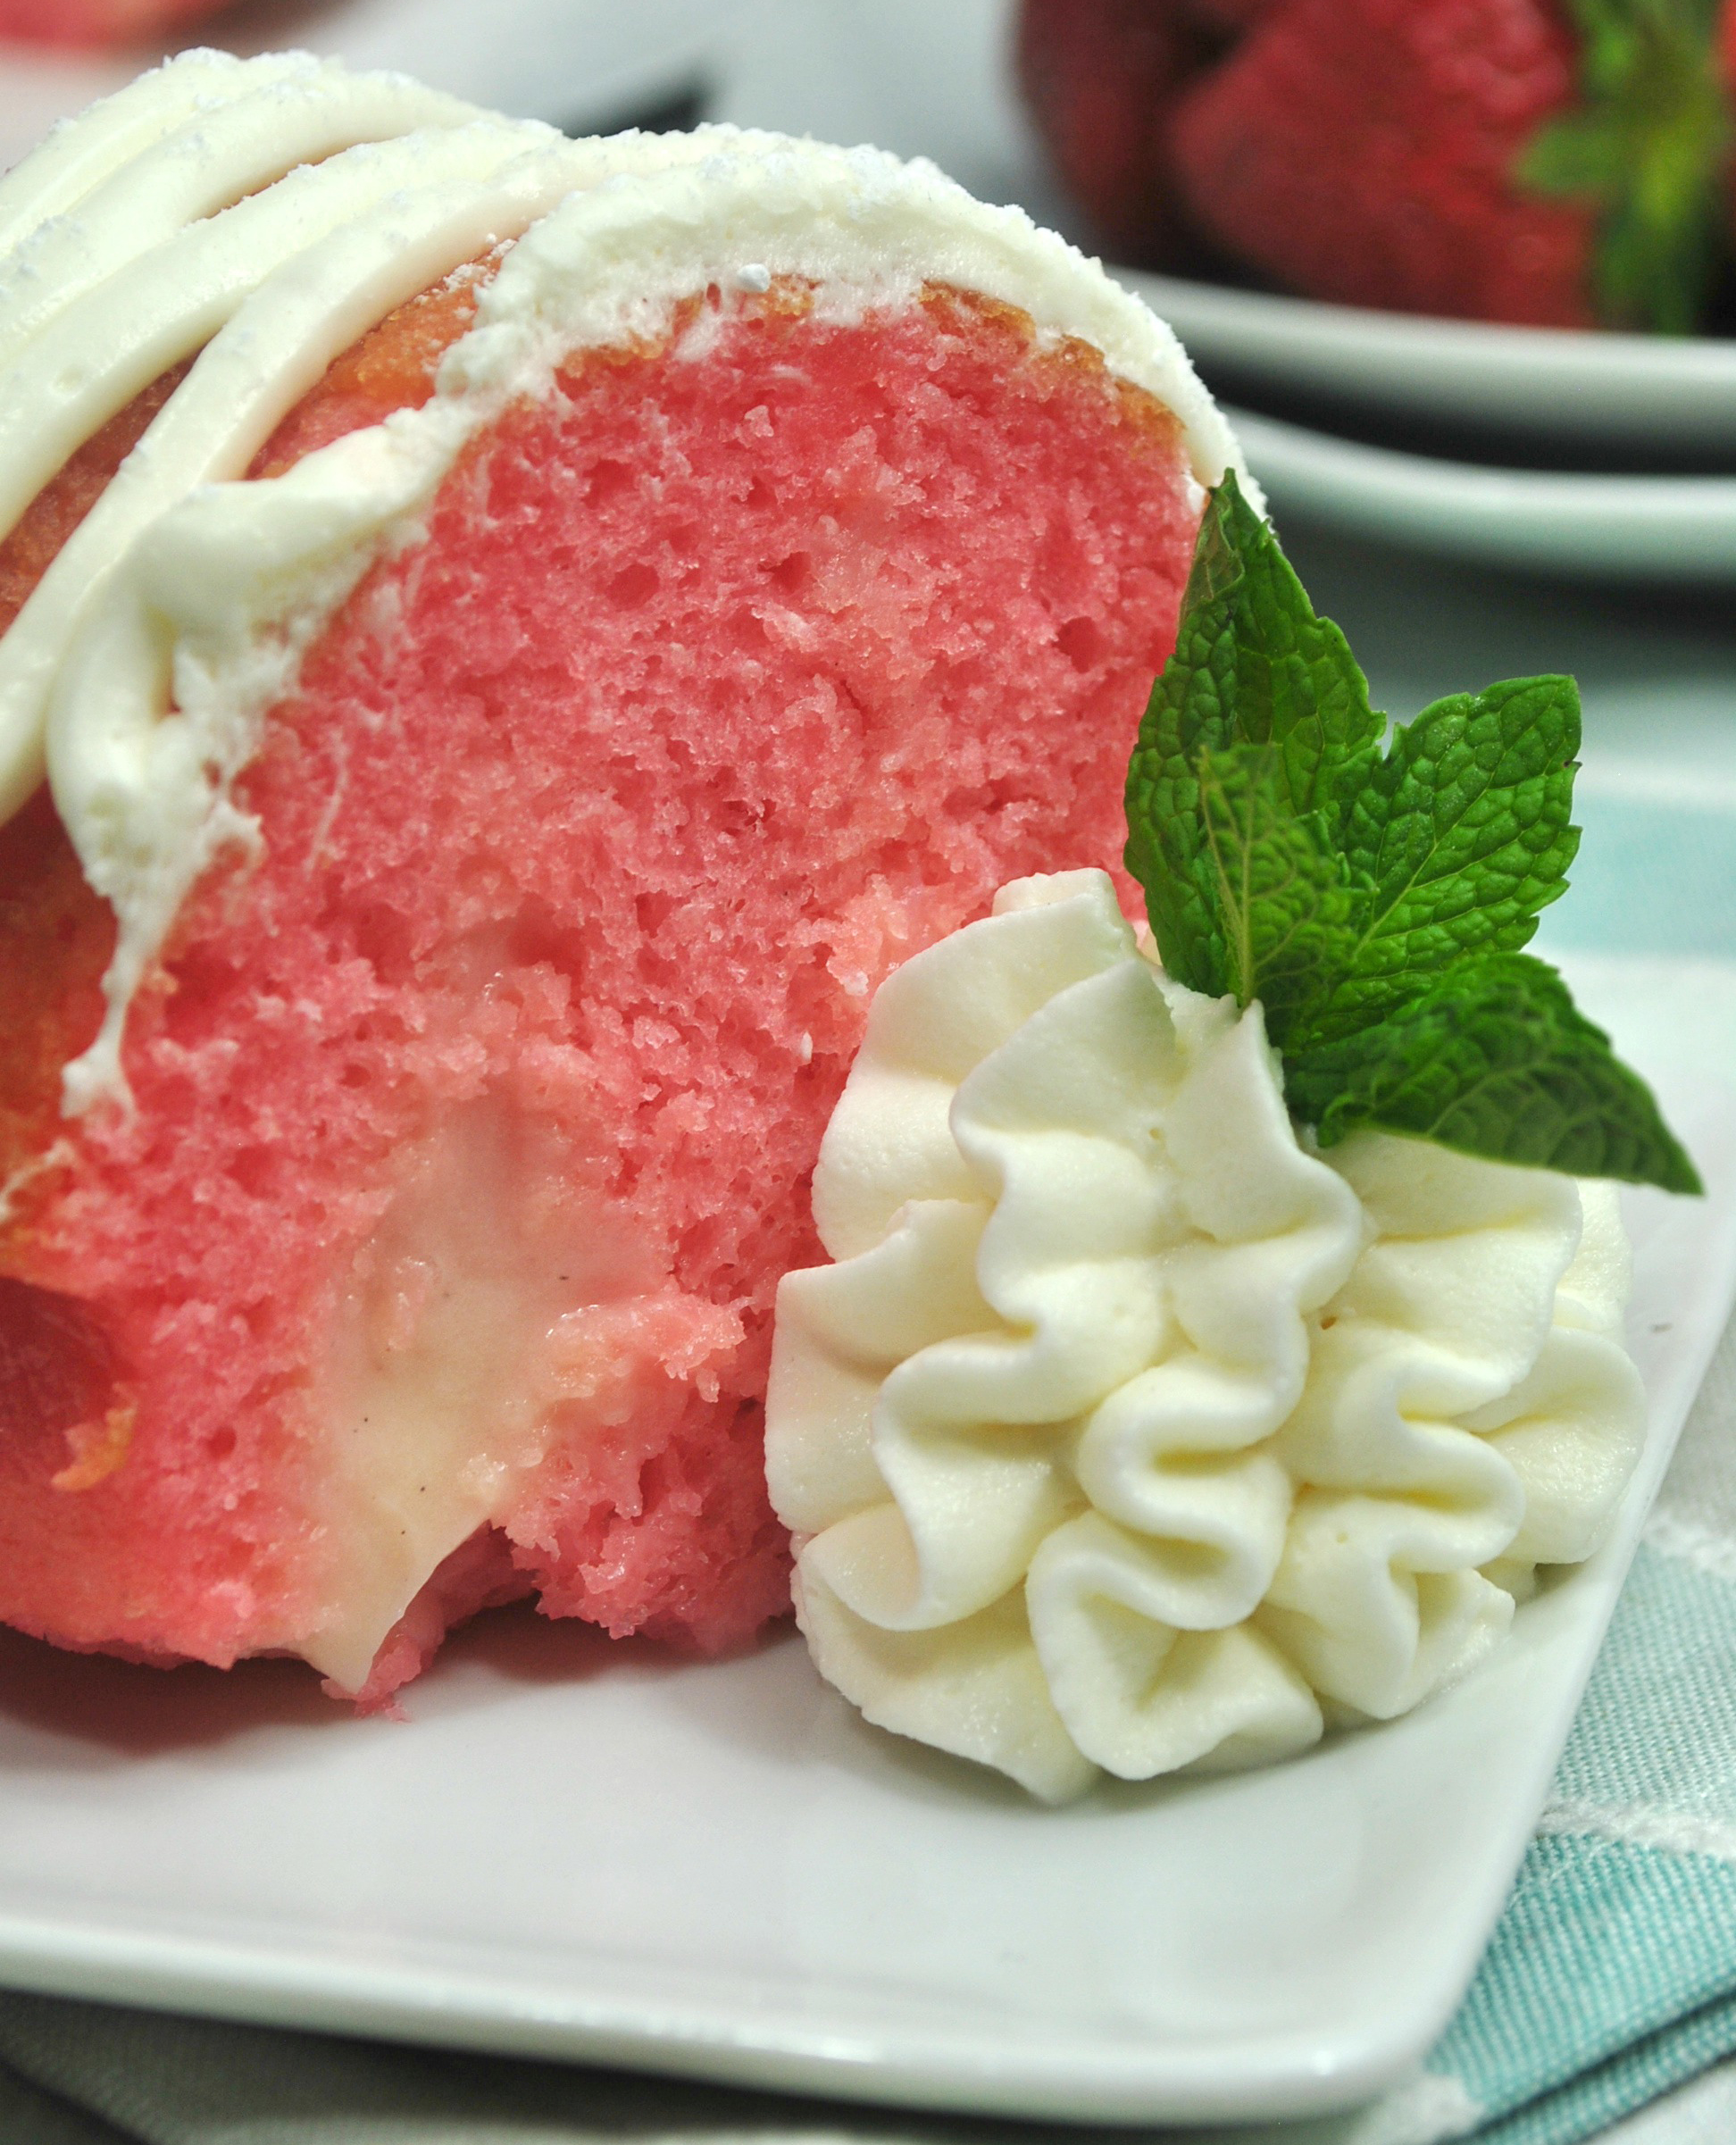 Strawberry Bundt Cake with Cream Cheese Frosting